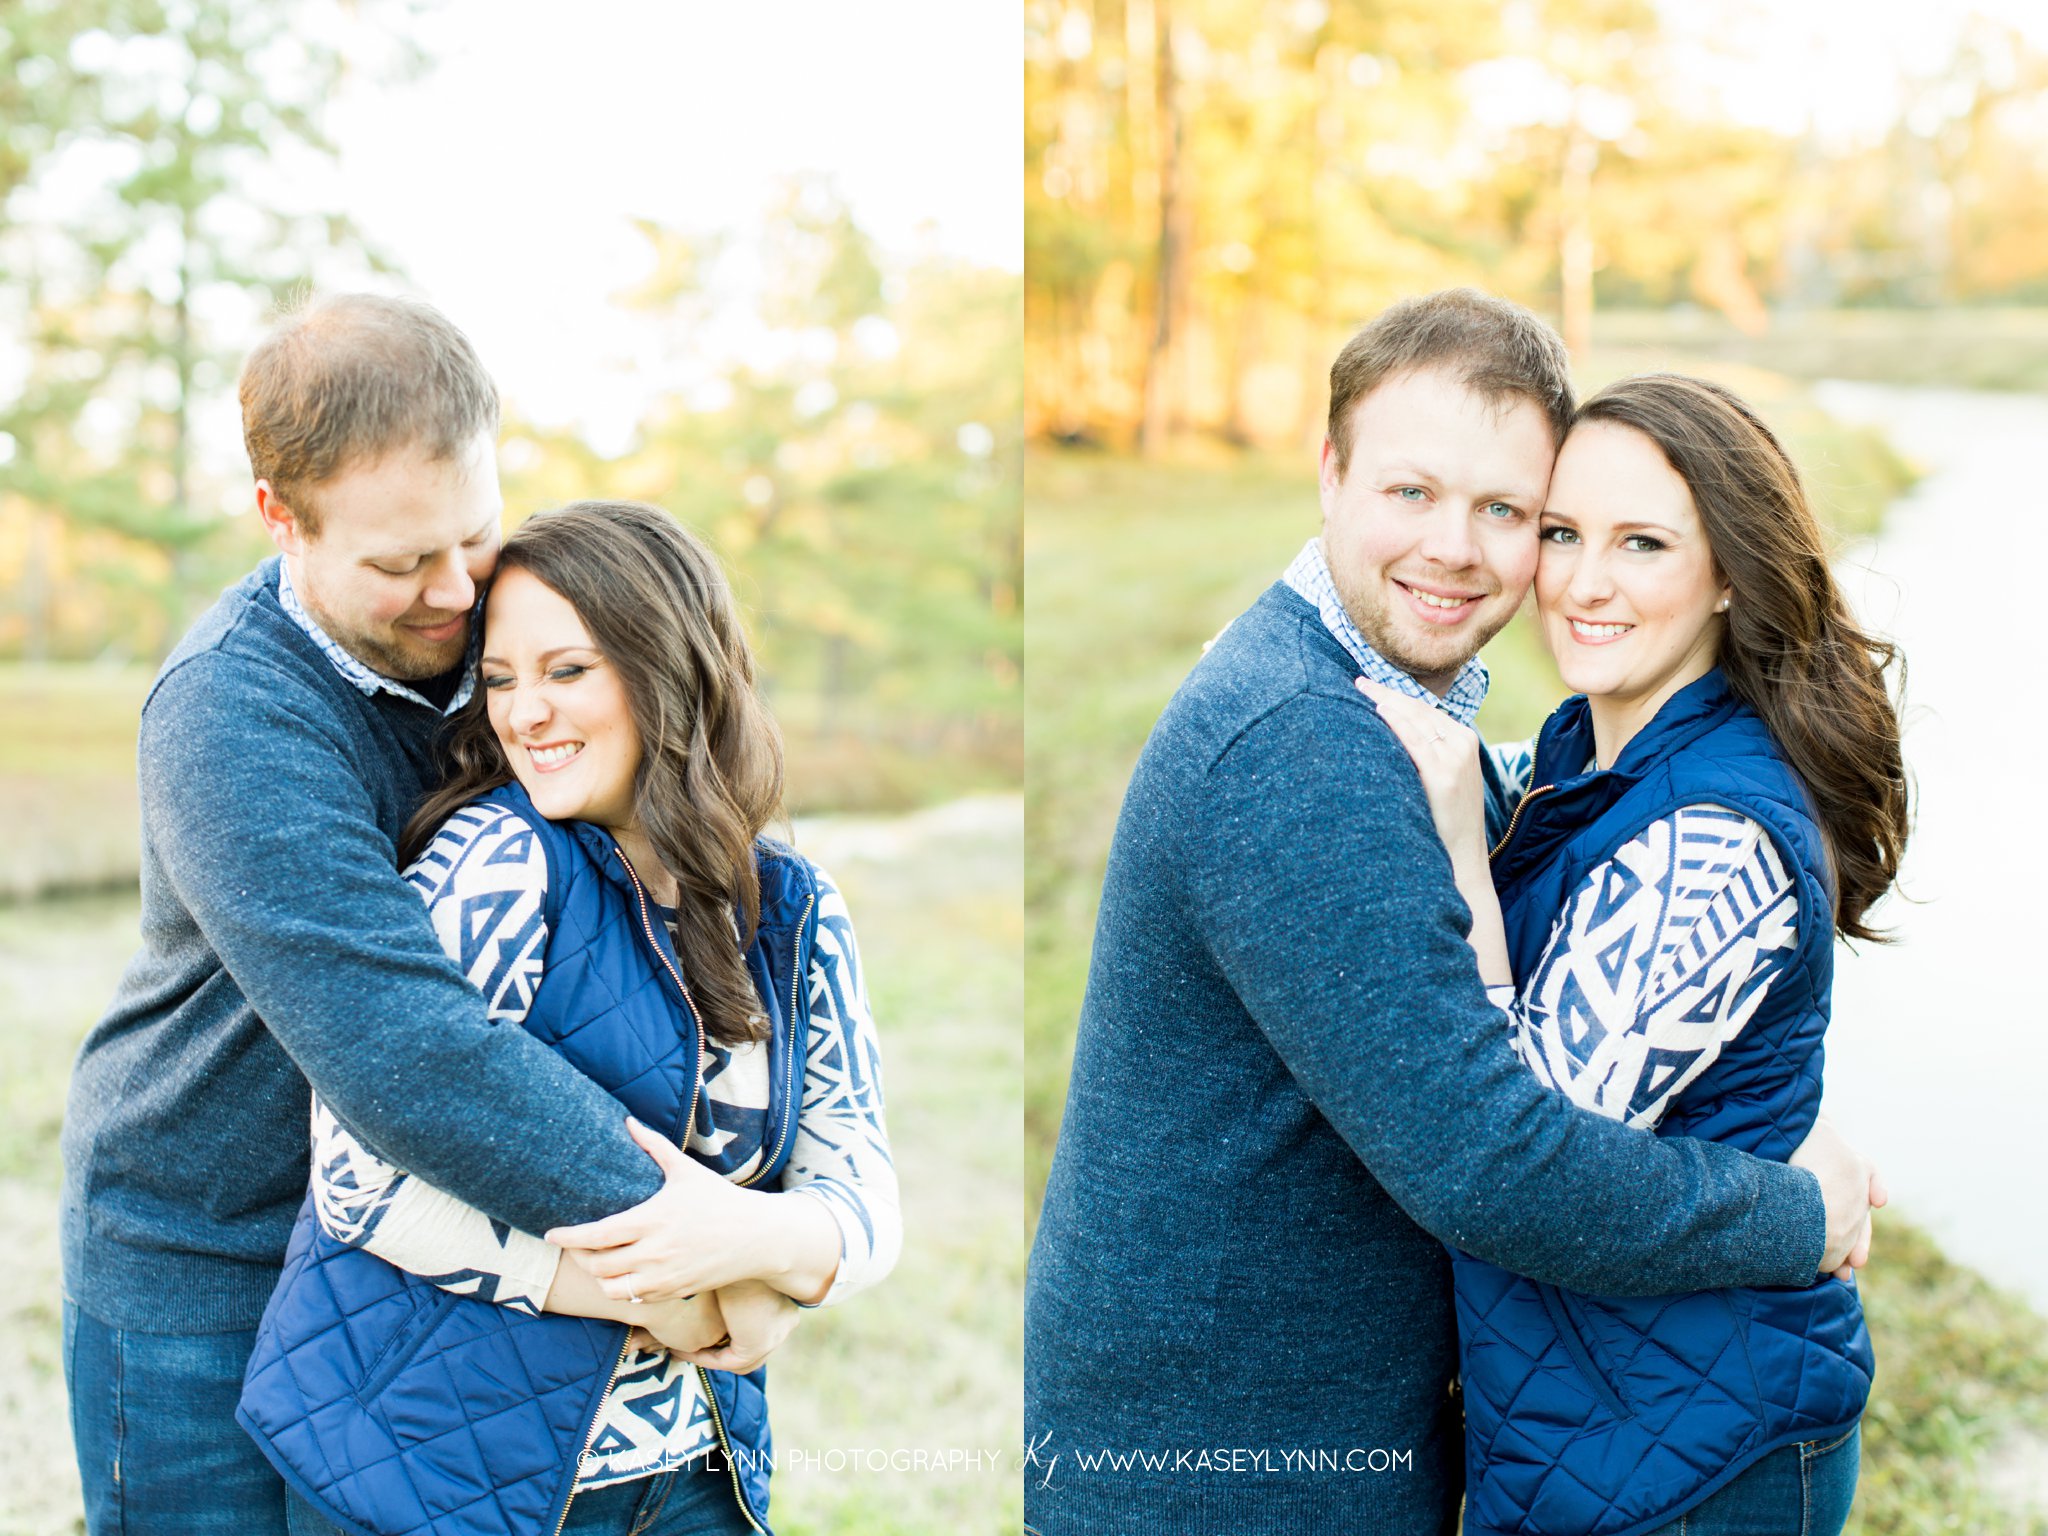 The Woodlands Engagement Session / Kasey Lynn Photography